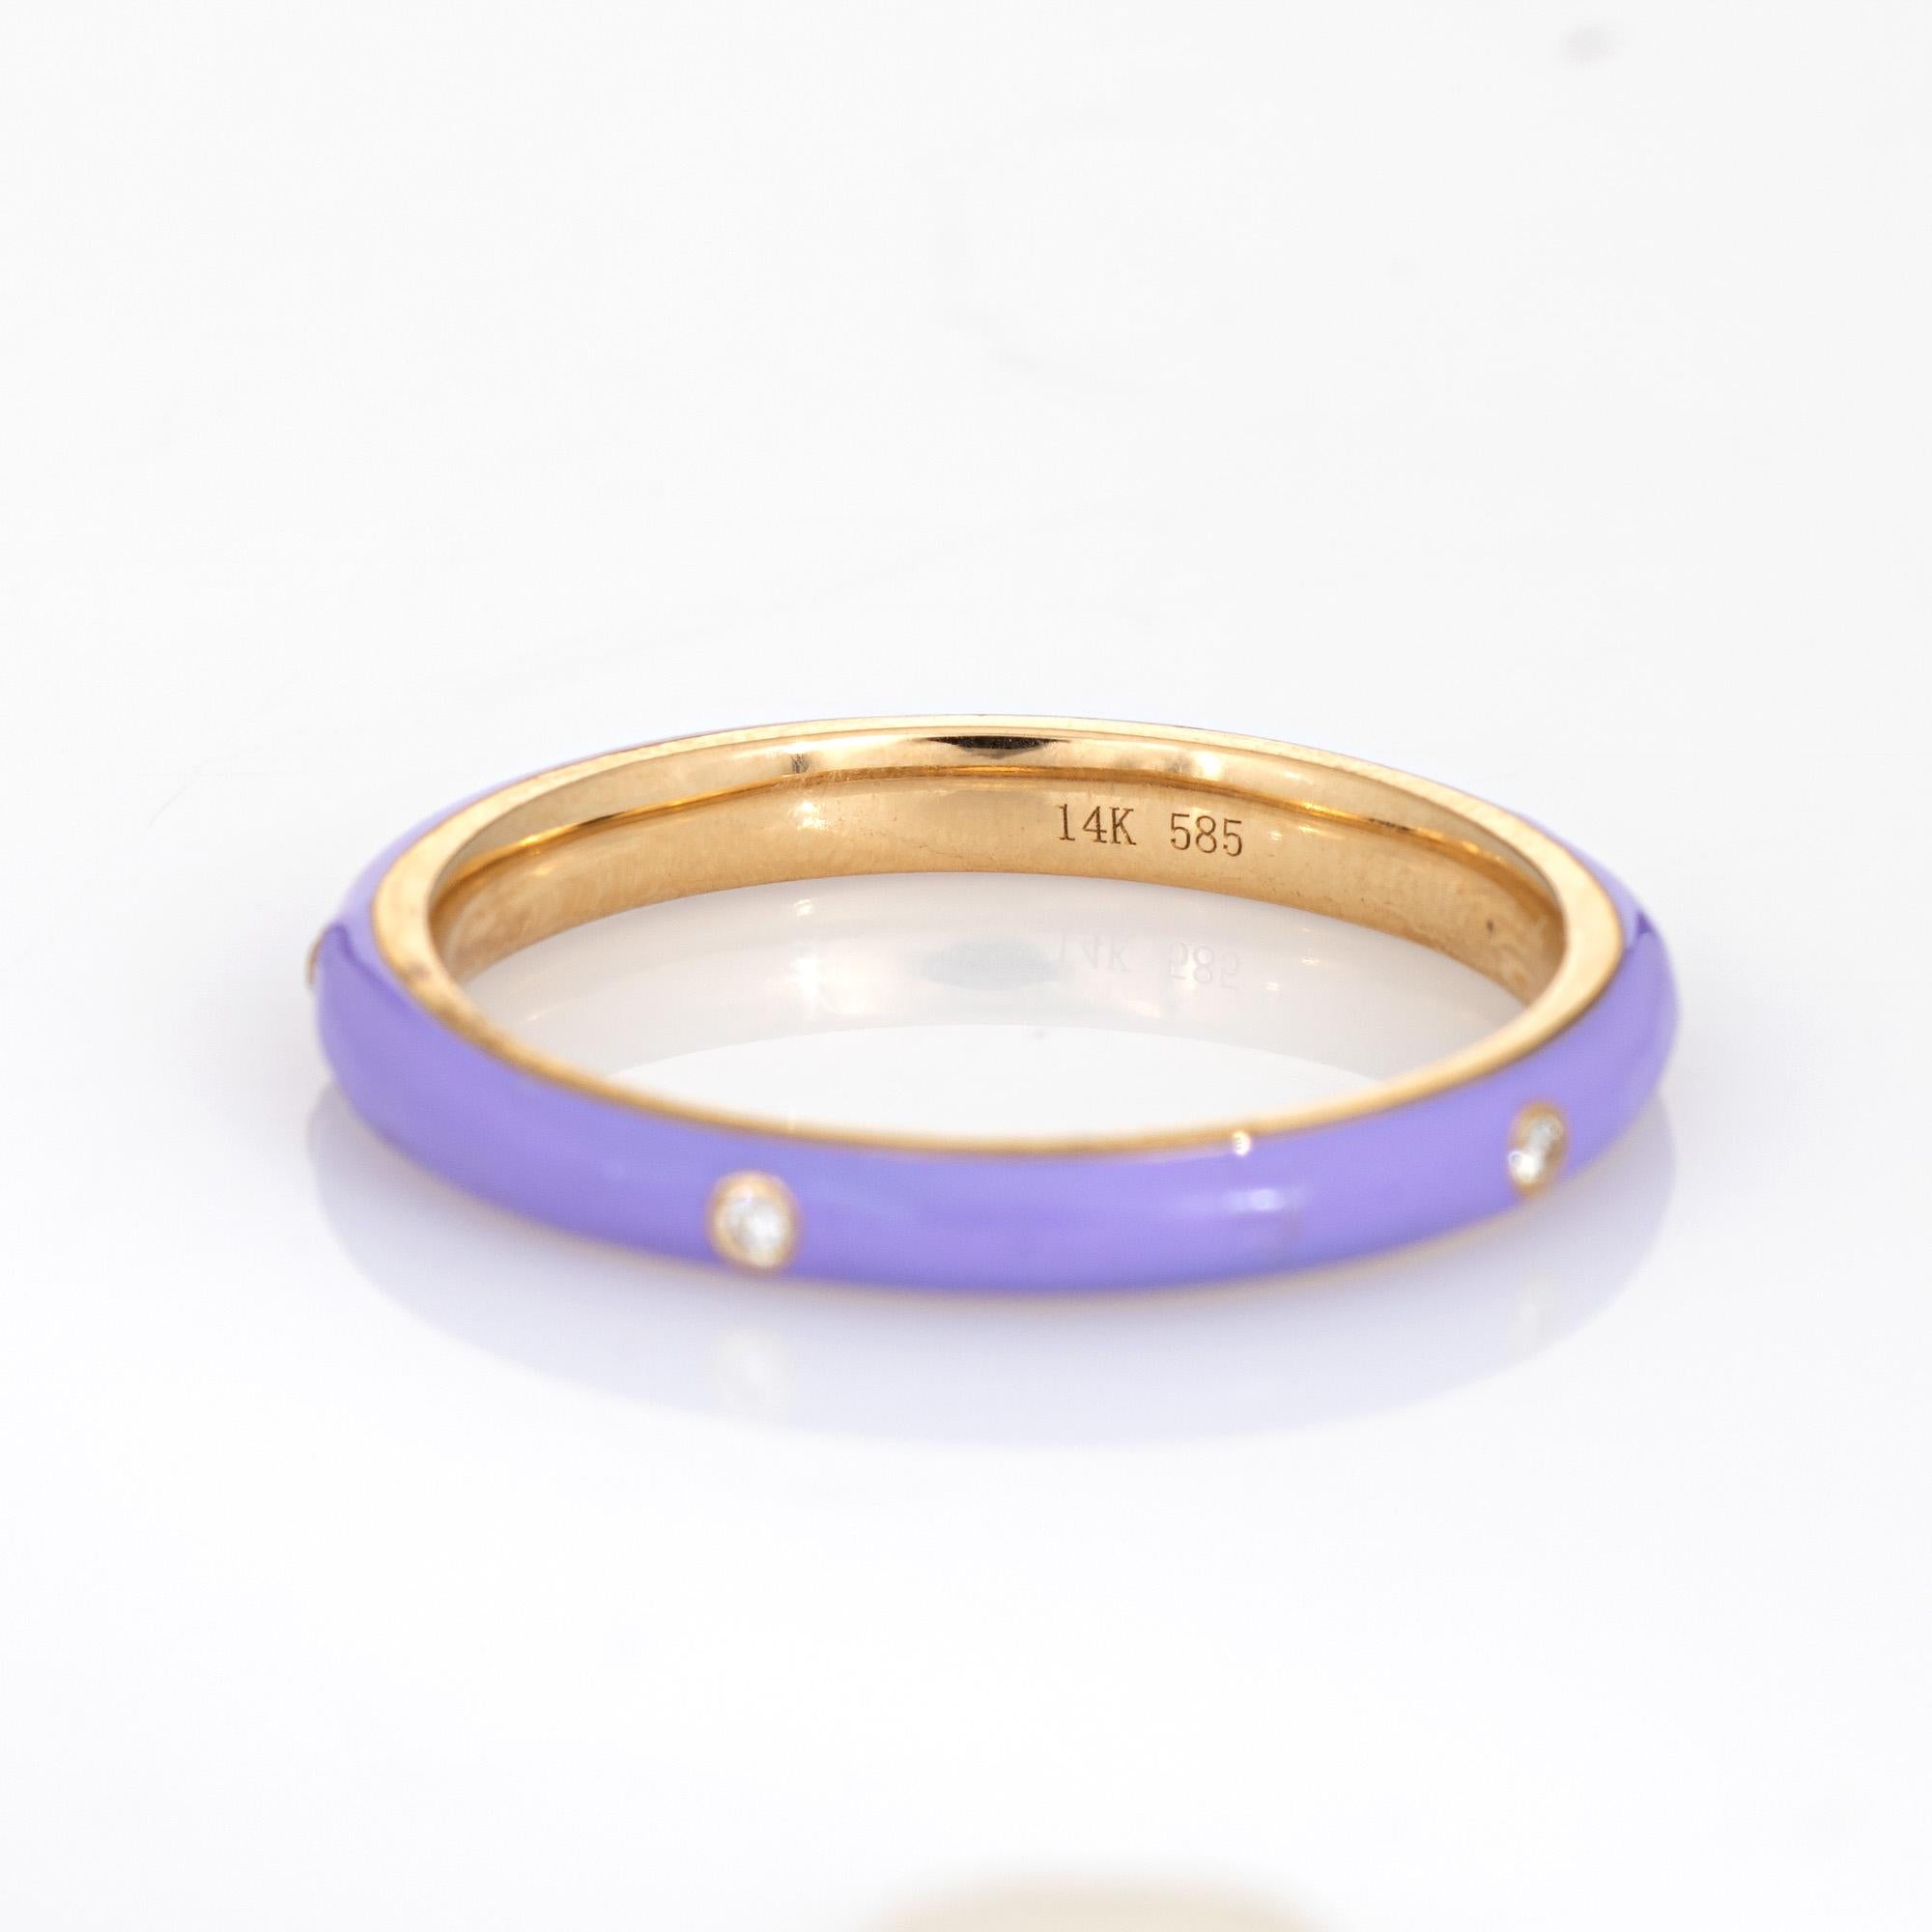 Lilac Enamel Diamond Ring 14k Yellow Gold Stacking Band Fine Jewelry In Good Condition For Sale In Torrance, CA